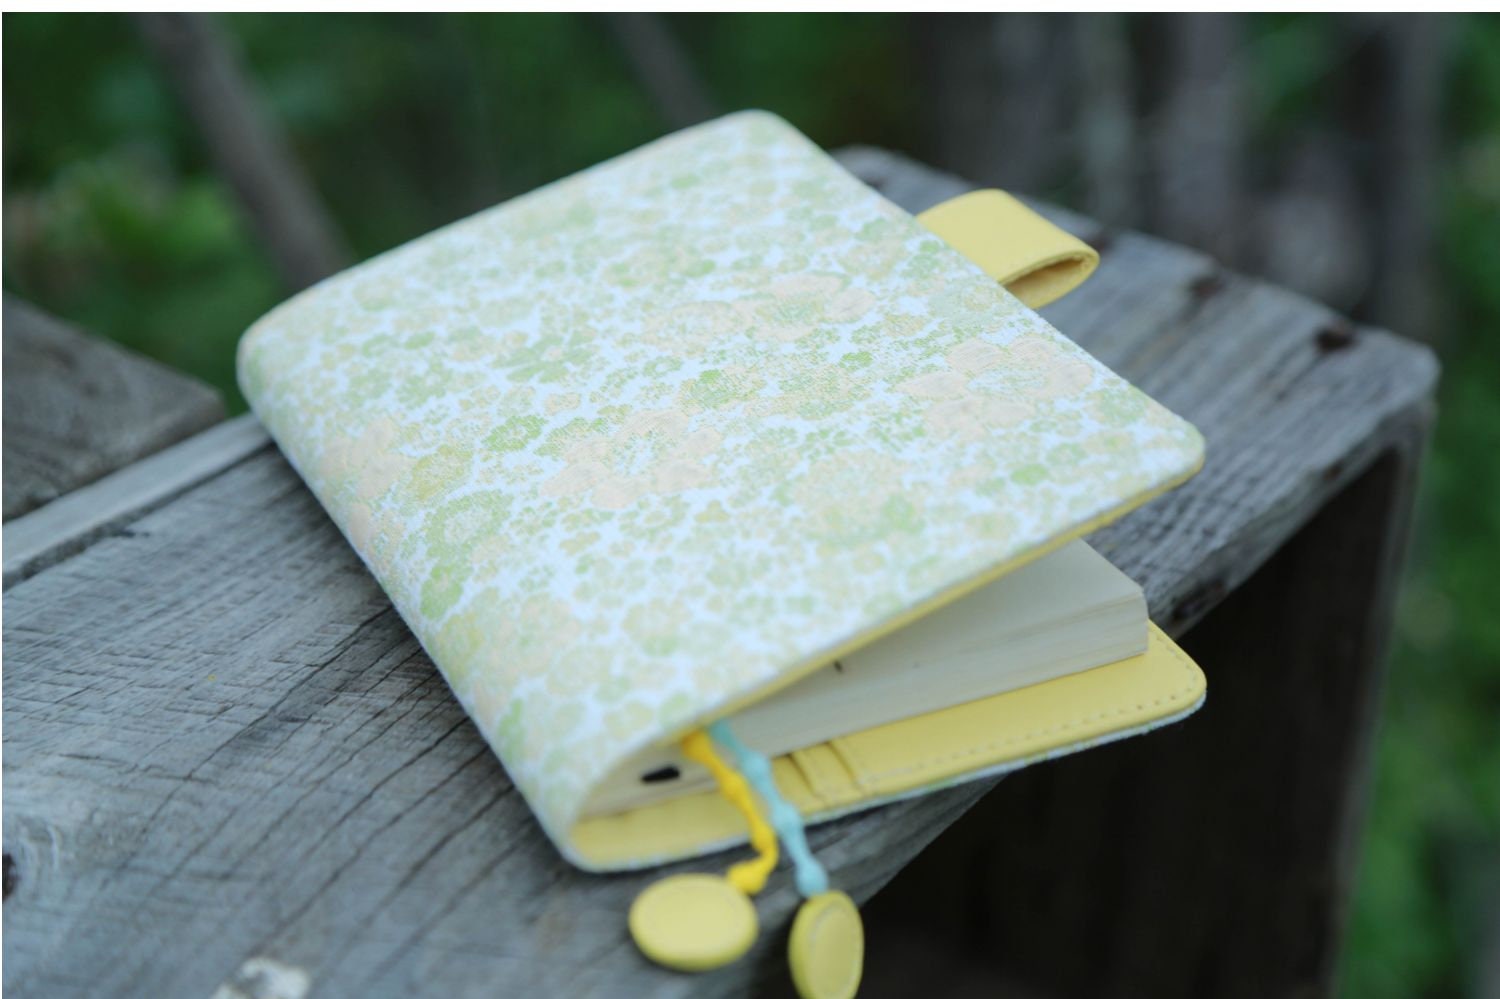 Field Flowers Bright Yellow Jacquard Notebook Cover Handmade Book Sleeve for A5 A6 B6 Planner Diary Journal Weeks Hobonichi, Midori Kinbor